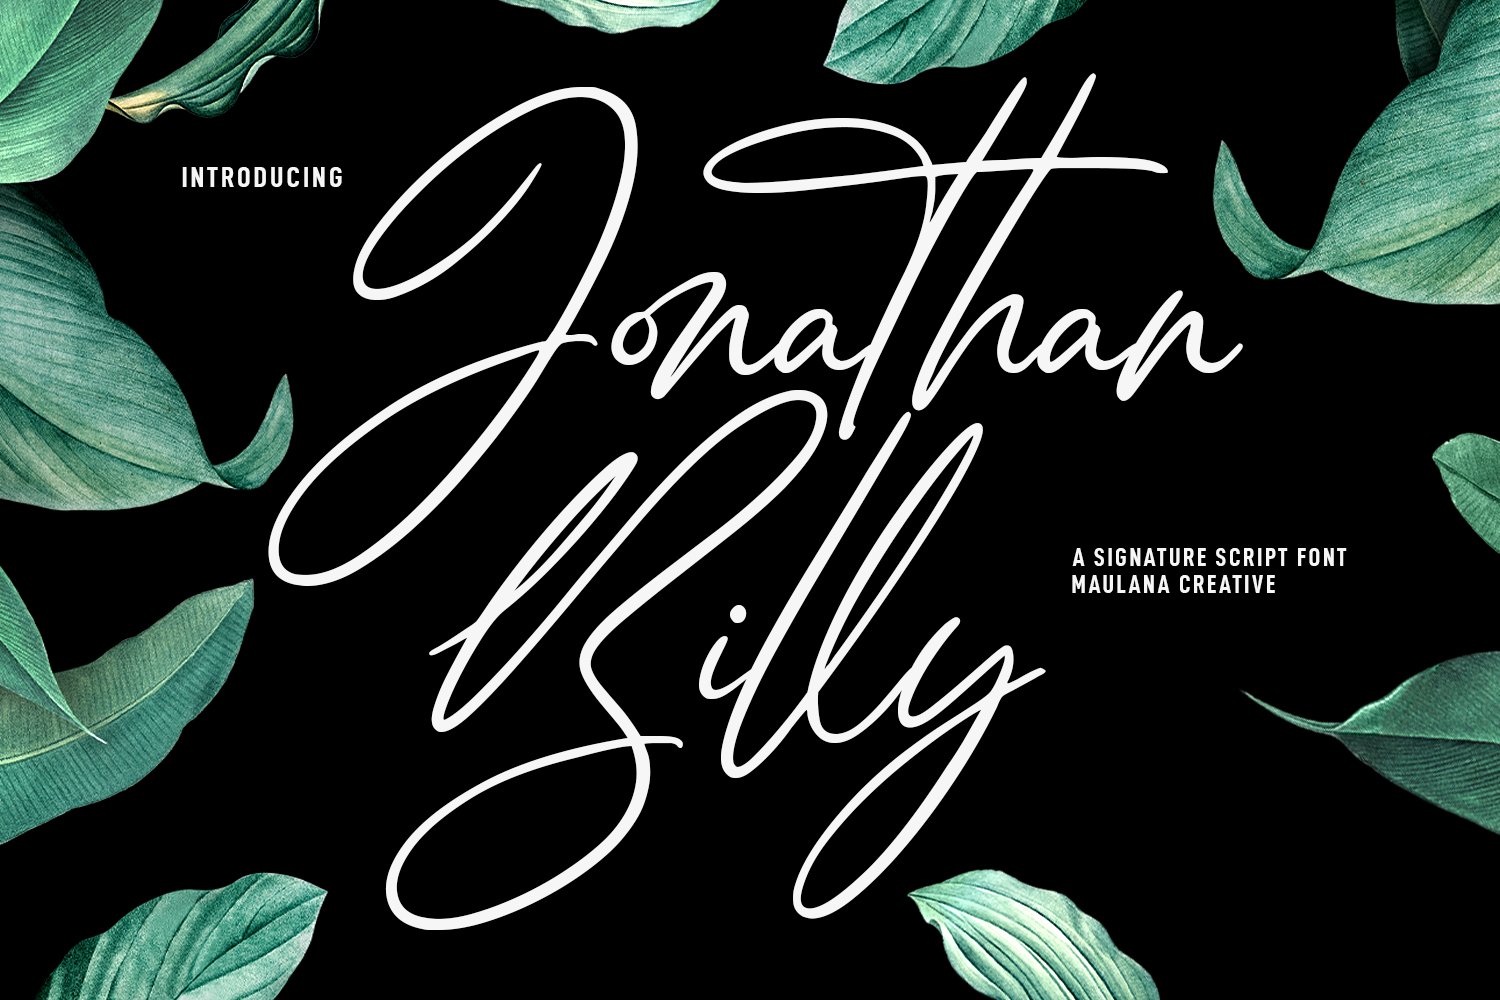 Jonathan Billy Signature Script Font cover image.